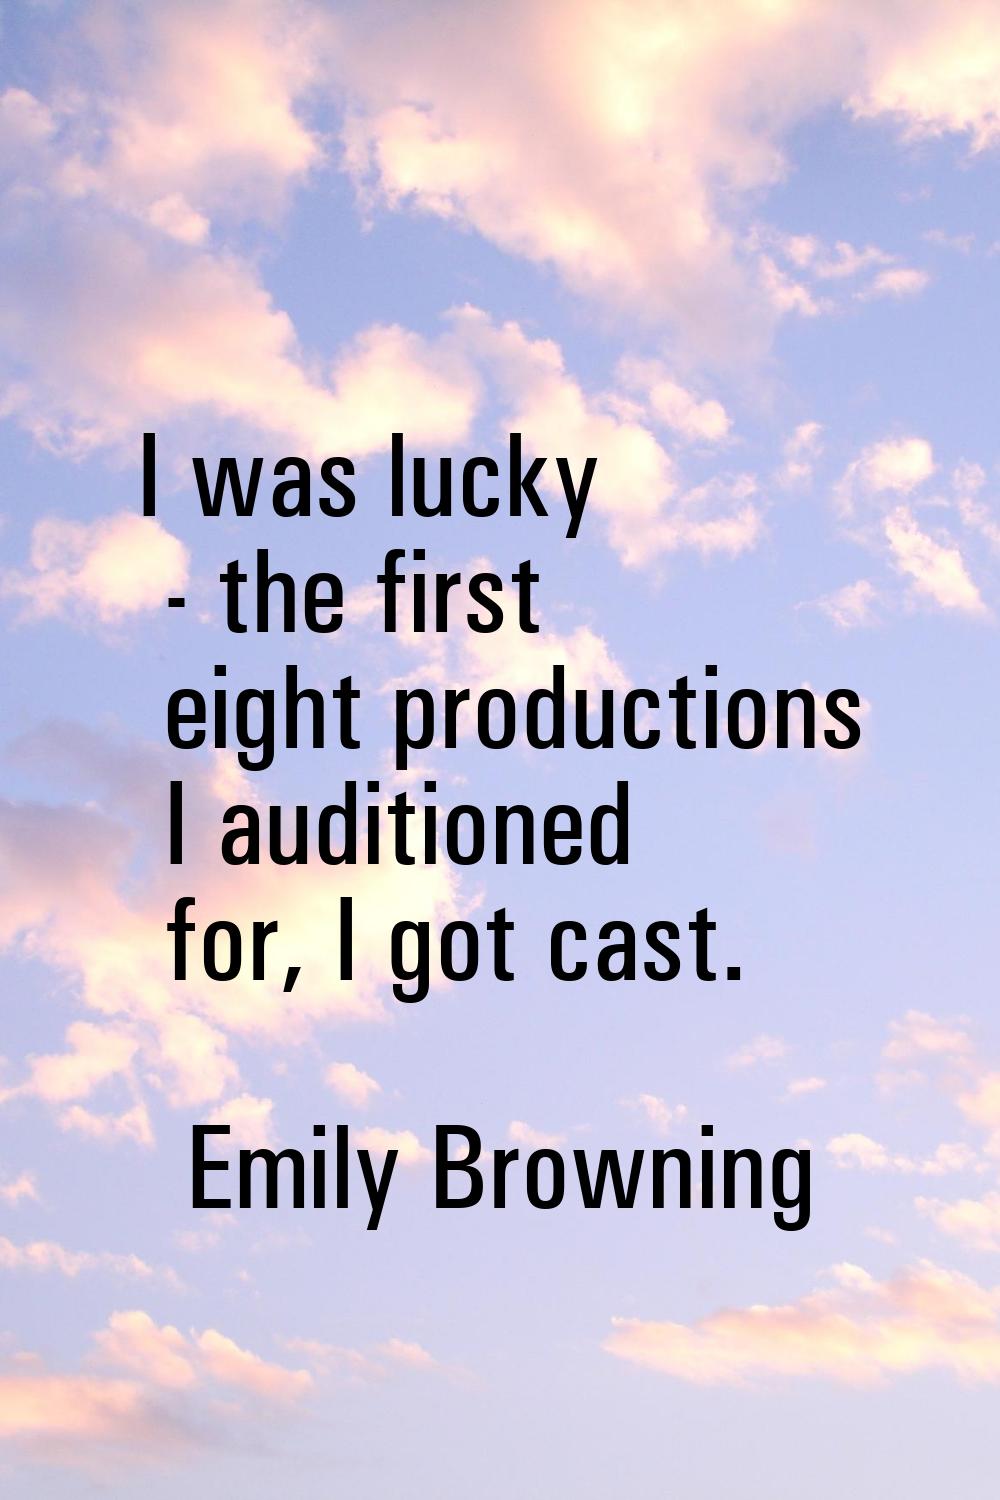 I was lucky - the first eight productions I auditioned for, I got cast.